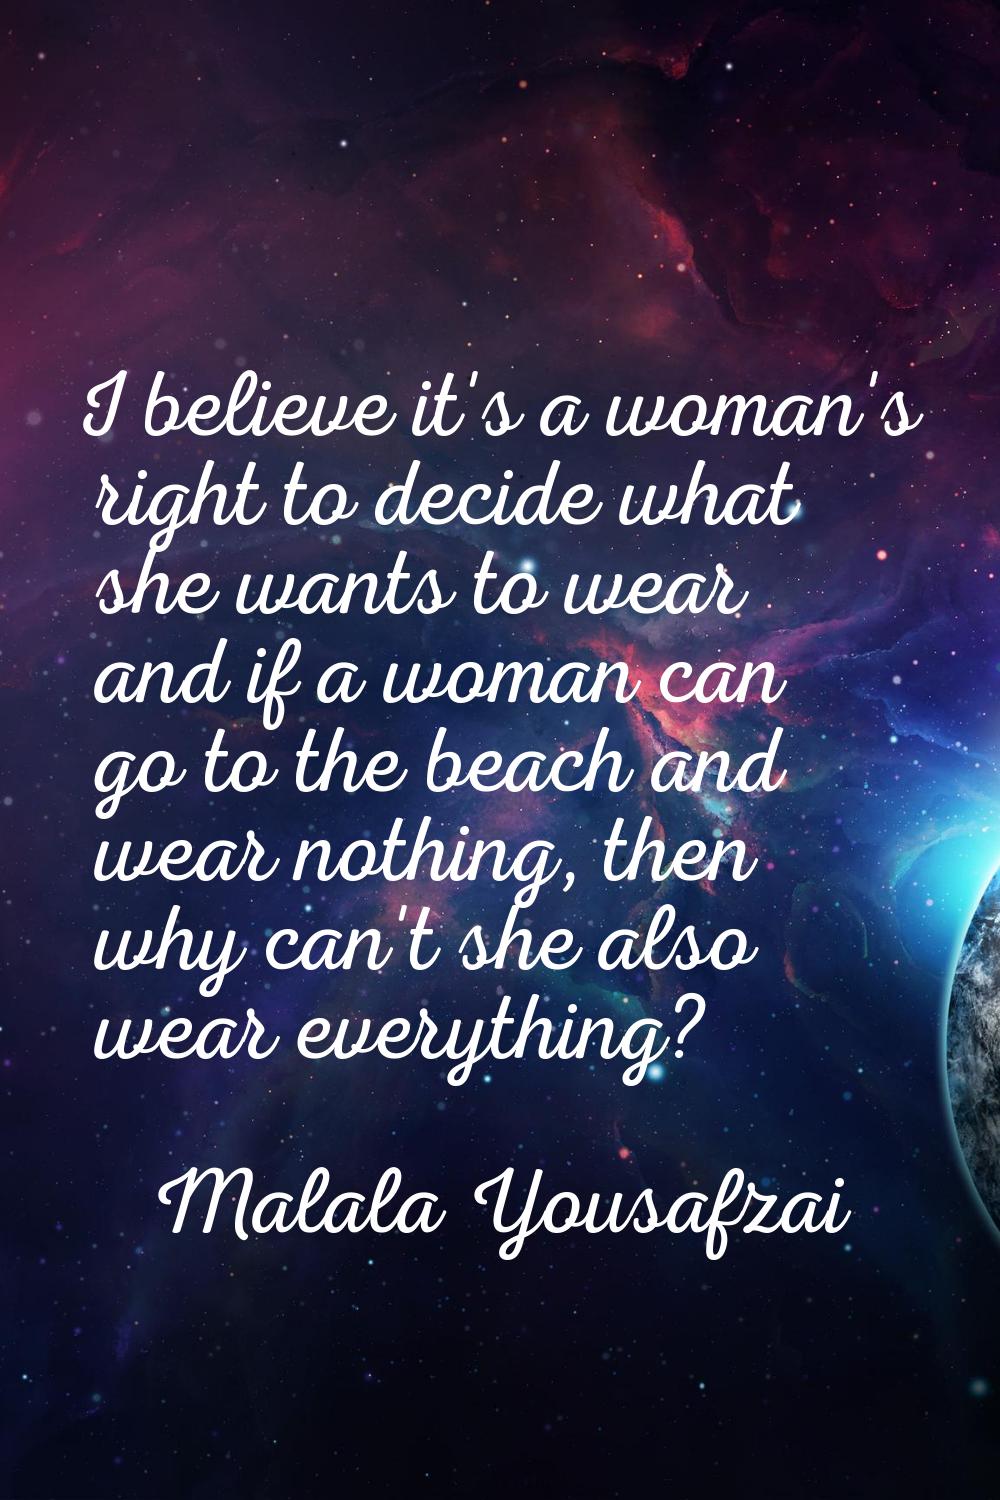 I believe it's a woman's right to decide what she wants to wear and if a woman can go to the beach 